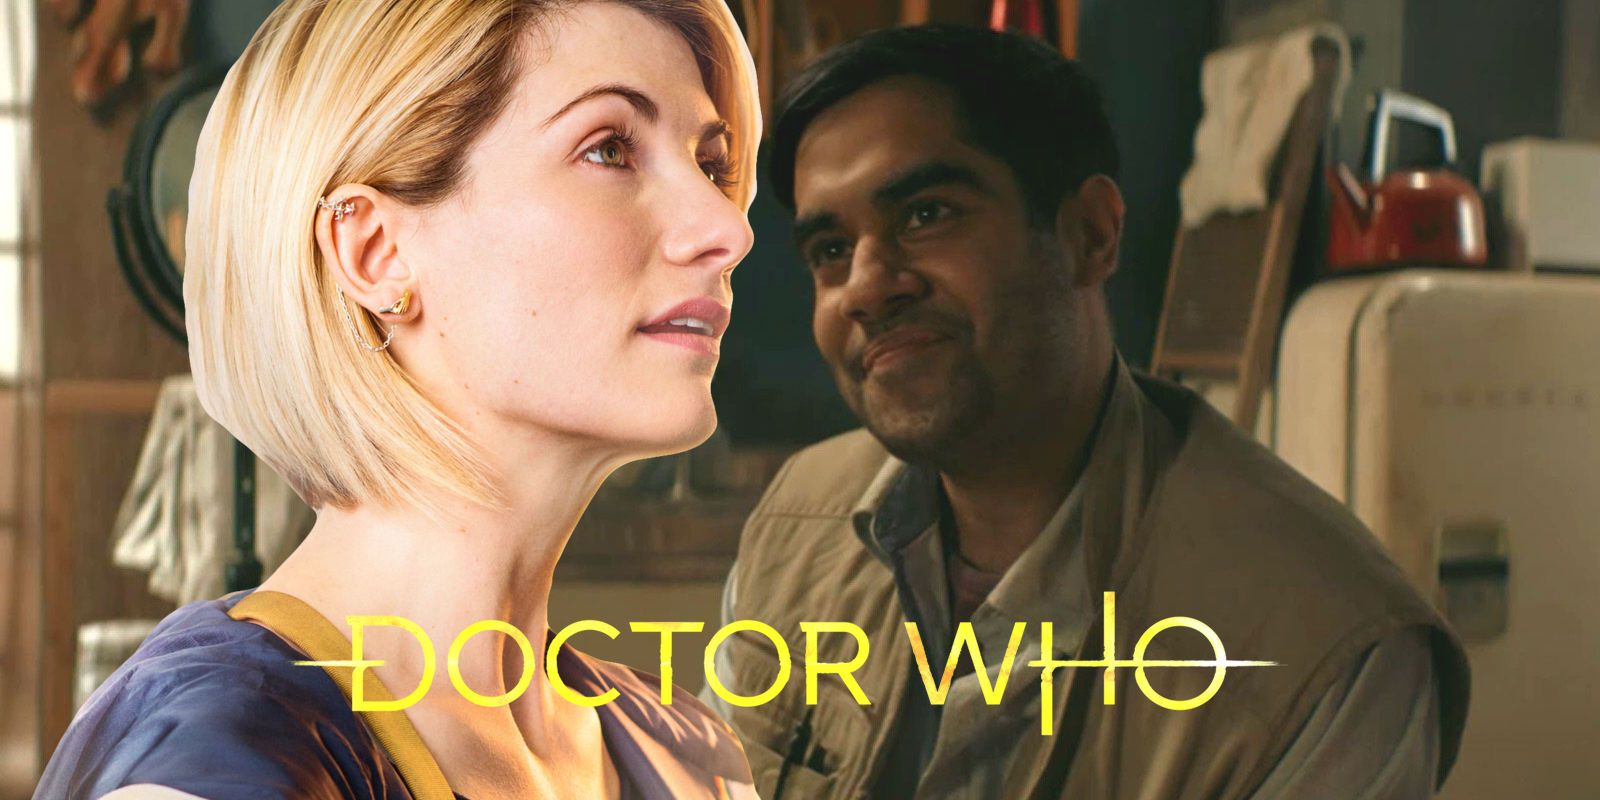 Sacha Dhawan as The Master and Jodie Whittaker as Thirteenth Doctor in Doctor Who